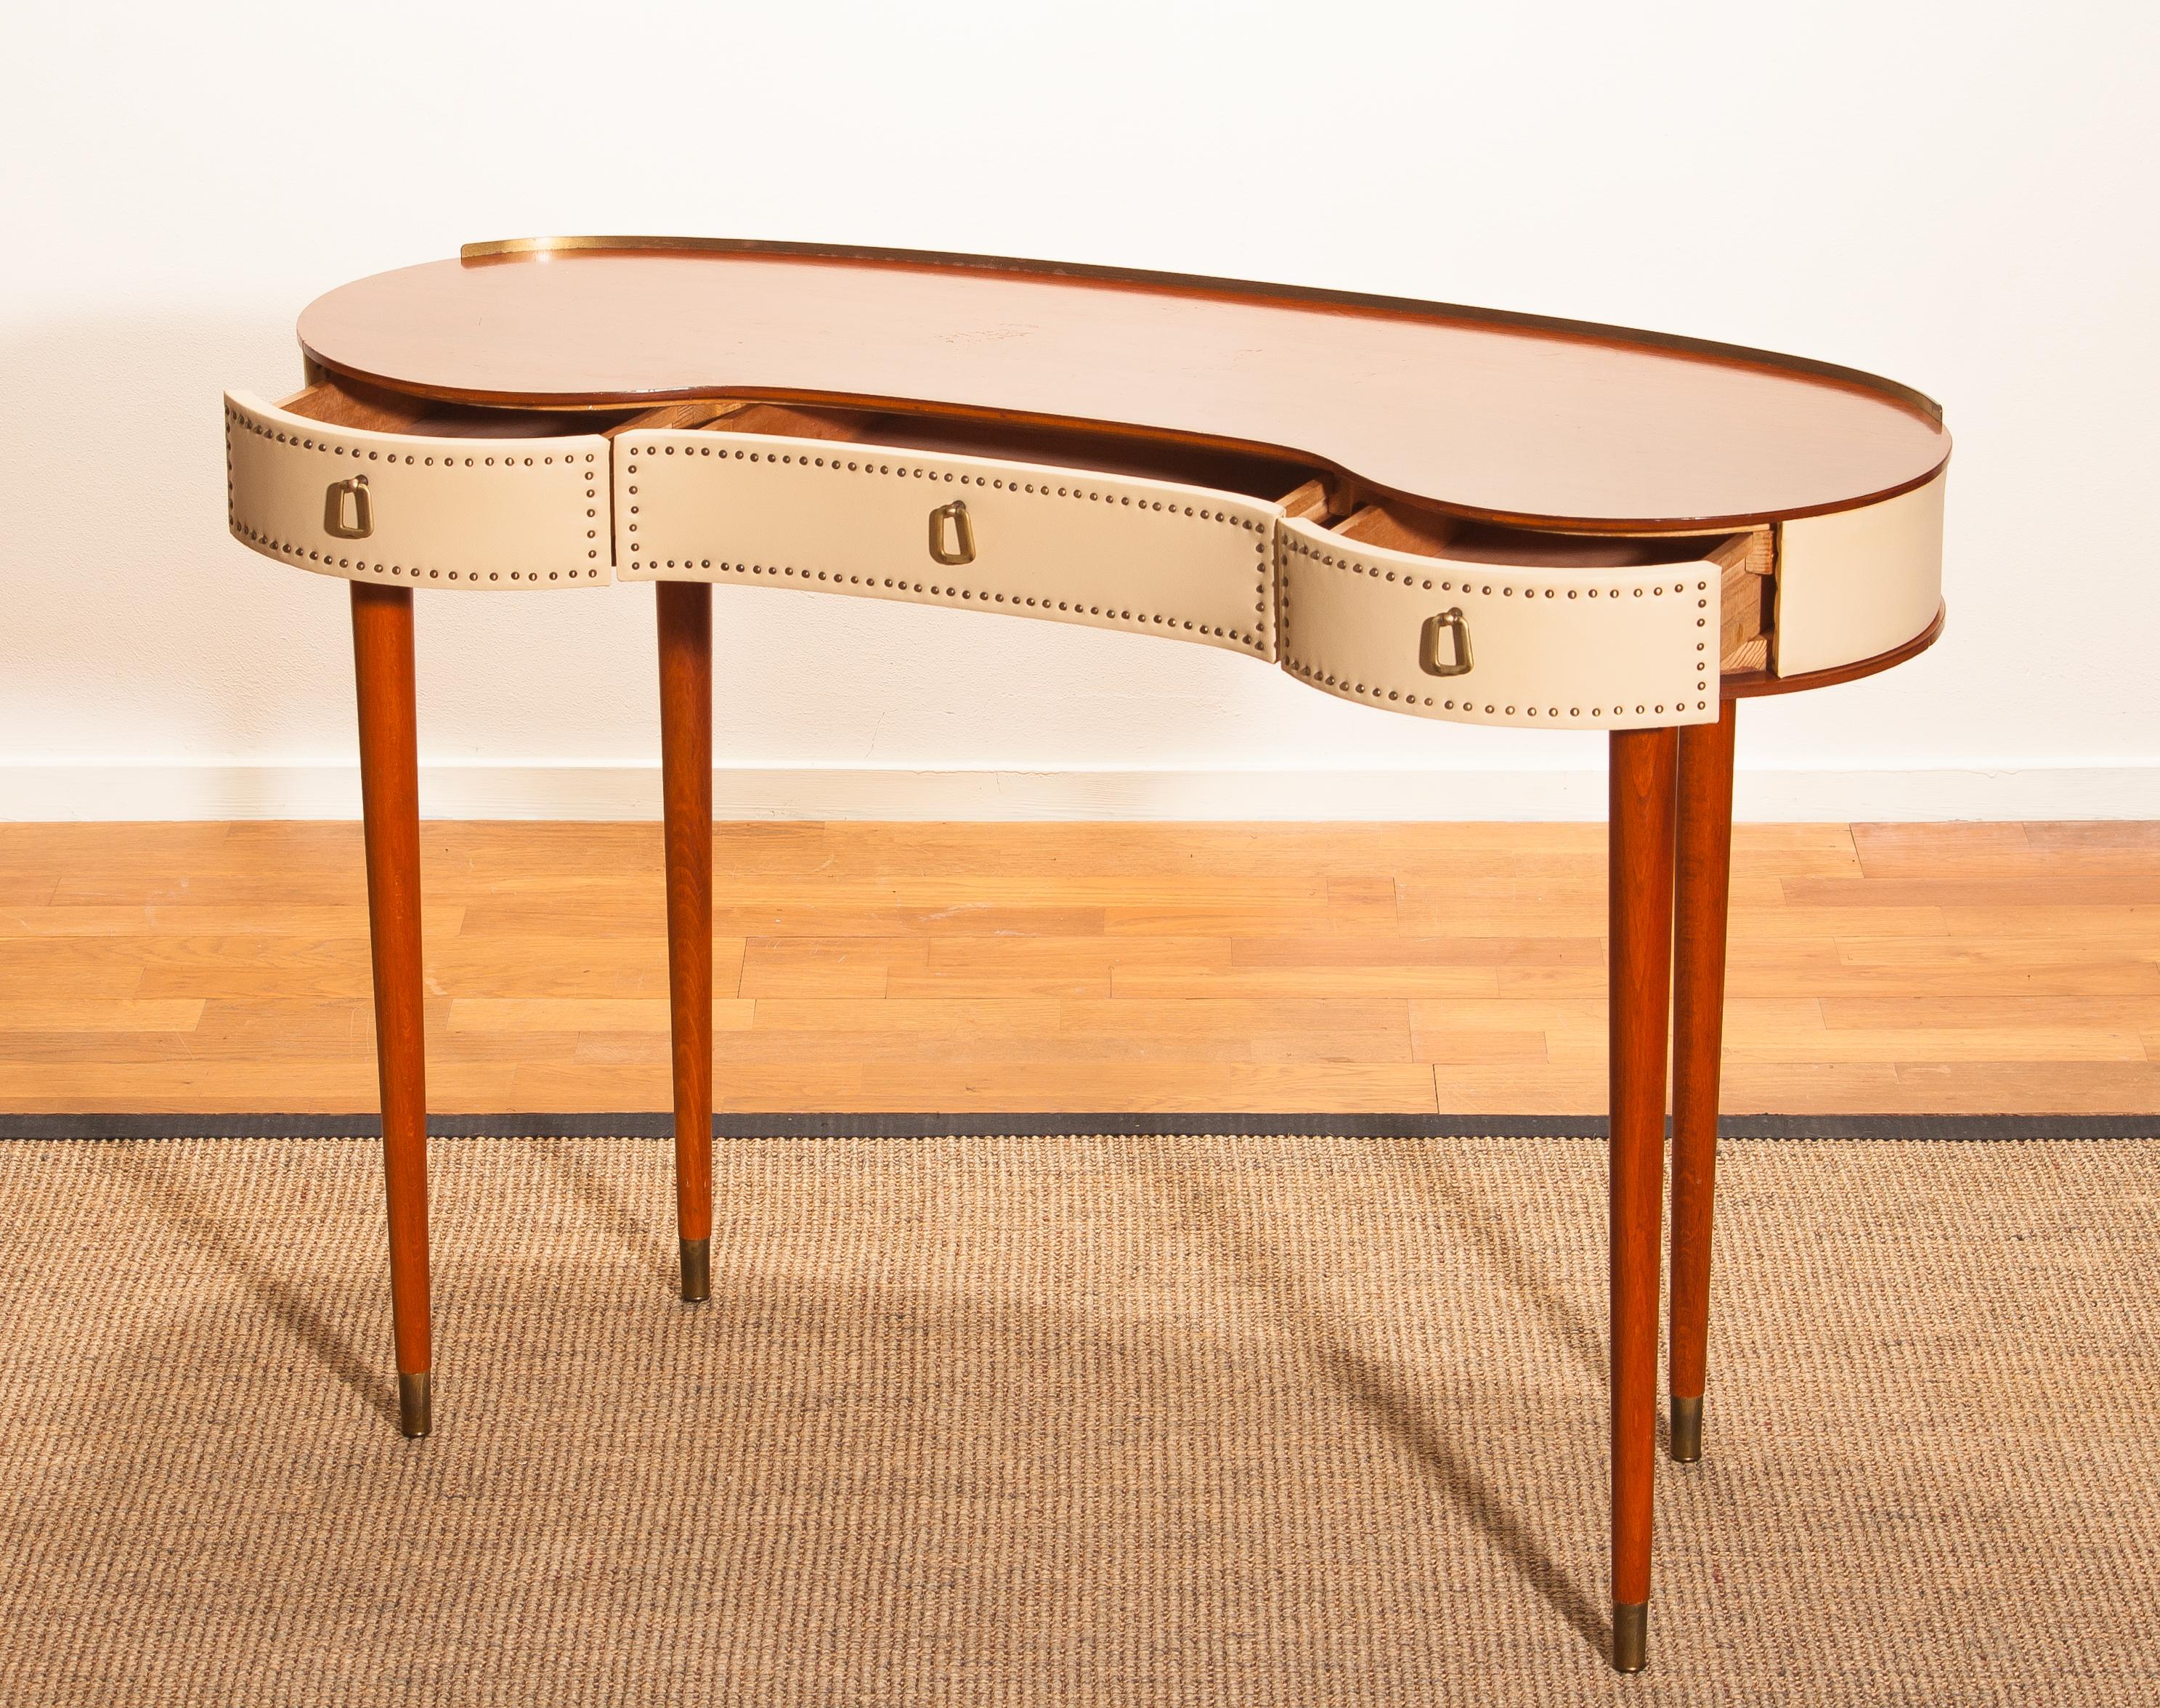 Mid-20th Century Mahogany Vanity or Dressing Table by Halvdan Pettersson for Tibro, Sweden, 1950s